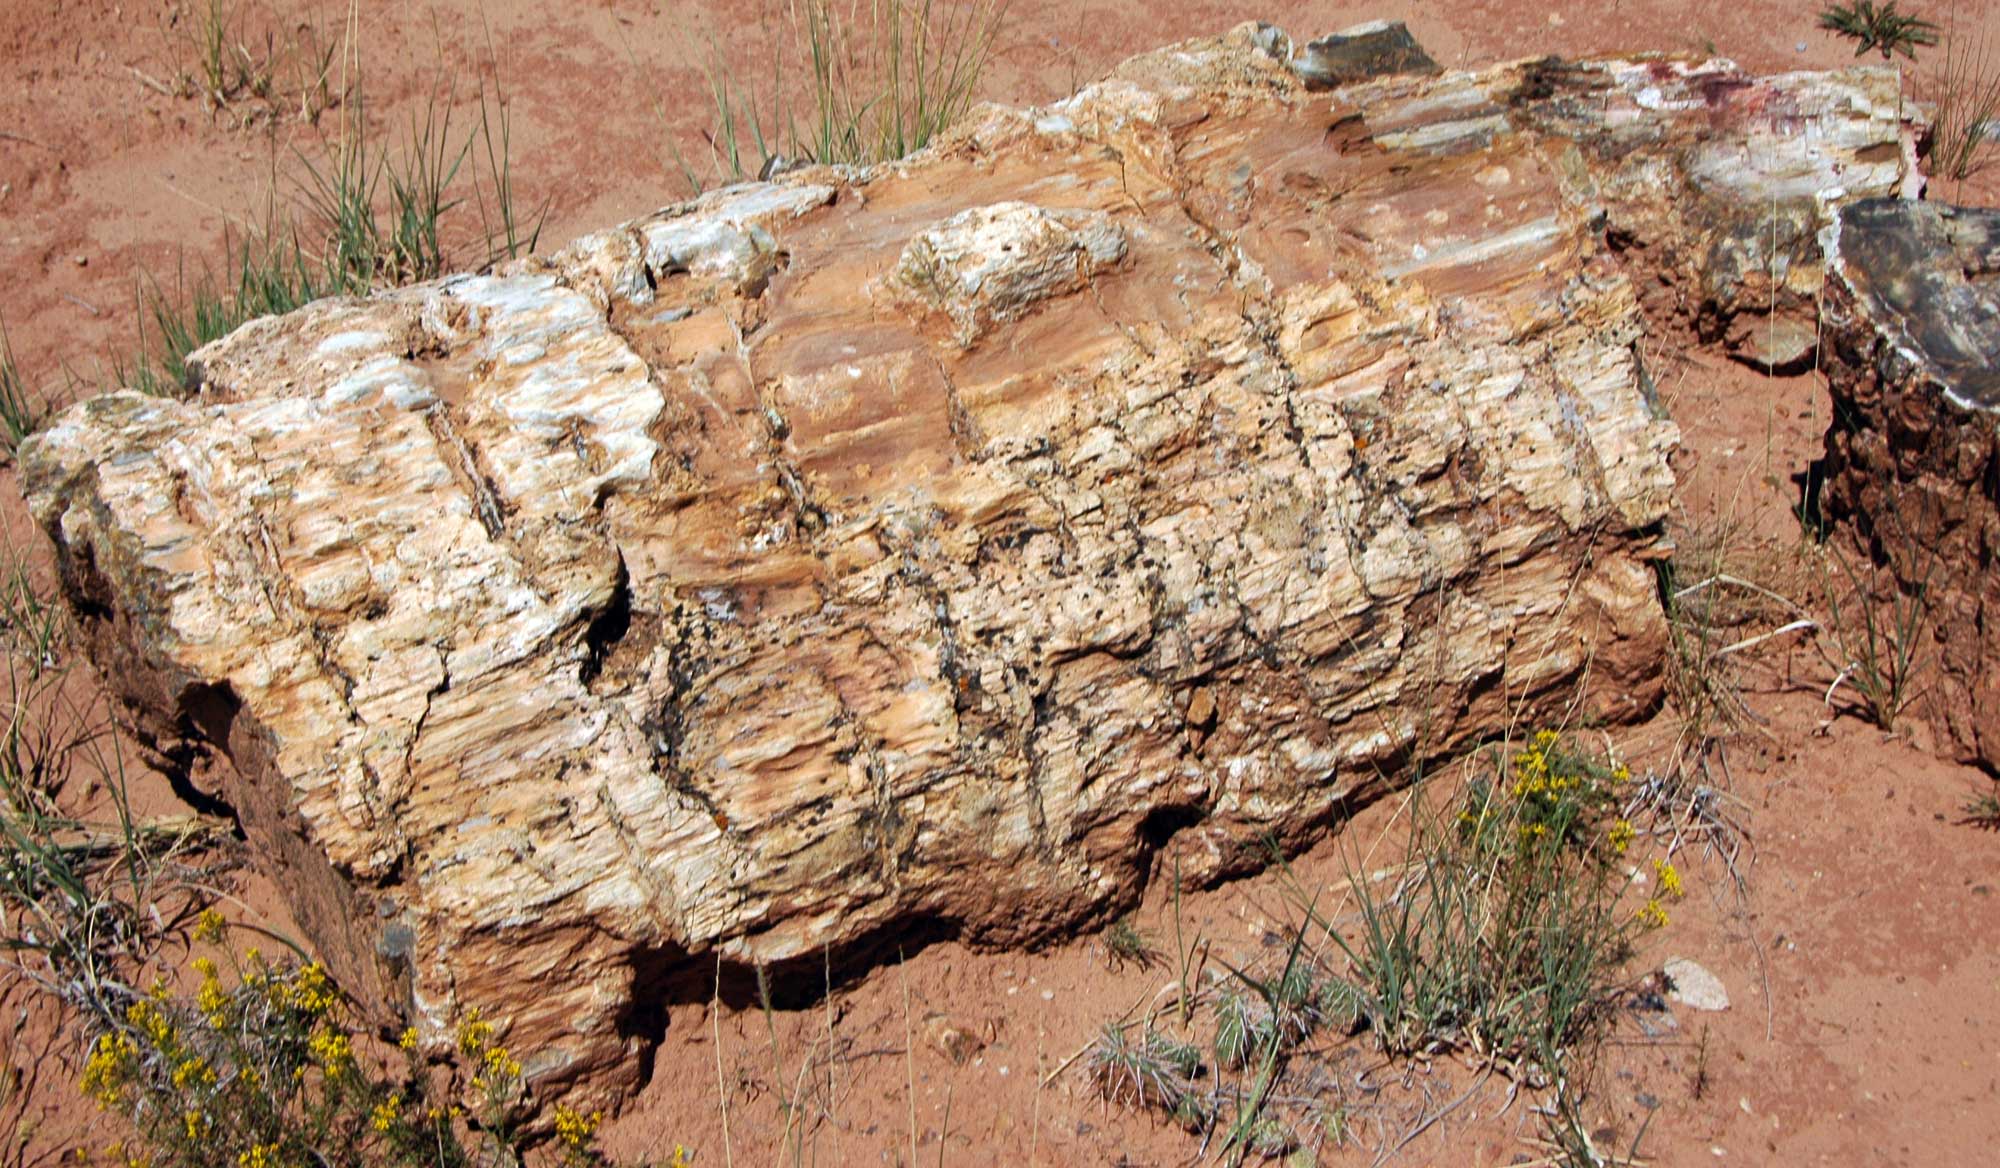 Photograph of a petrified log from Escalante Petrified Forest in the Jurassic Morrison Formation of Utah. The log looks like a weathered pieces of wood. It is light brown or beige in color.